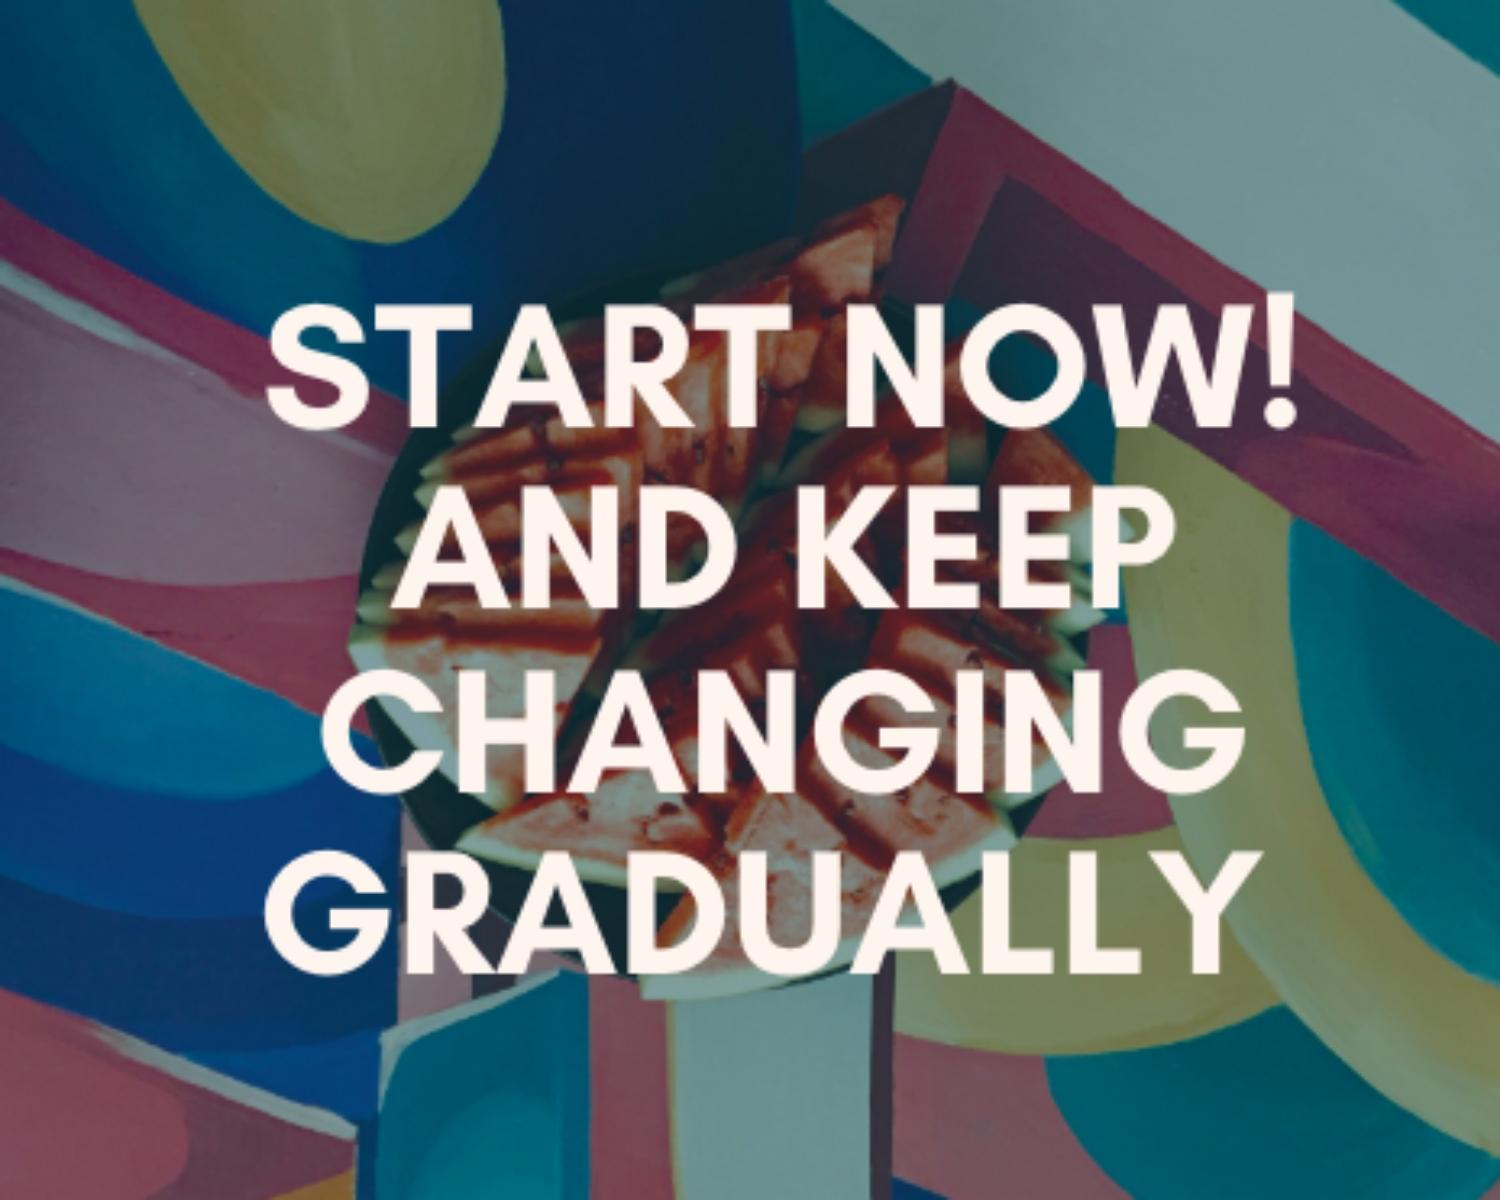 10. Start now! And keep changing gradually.